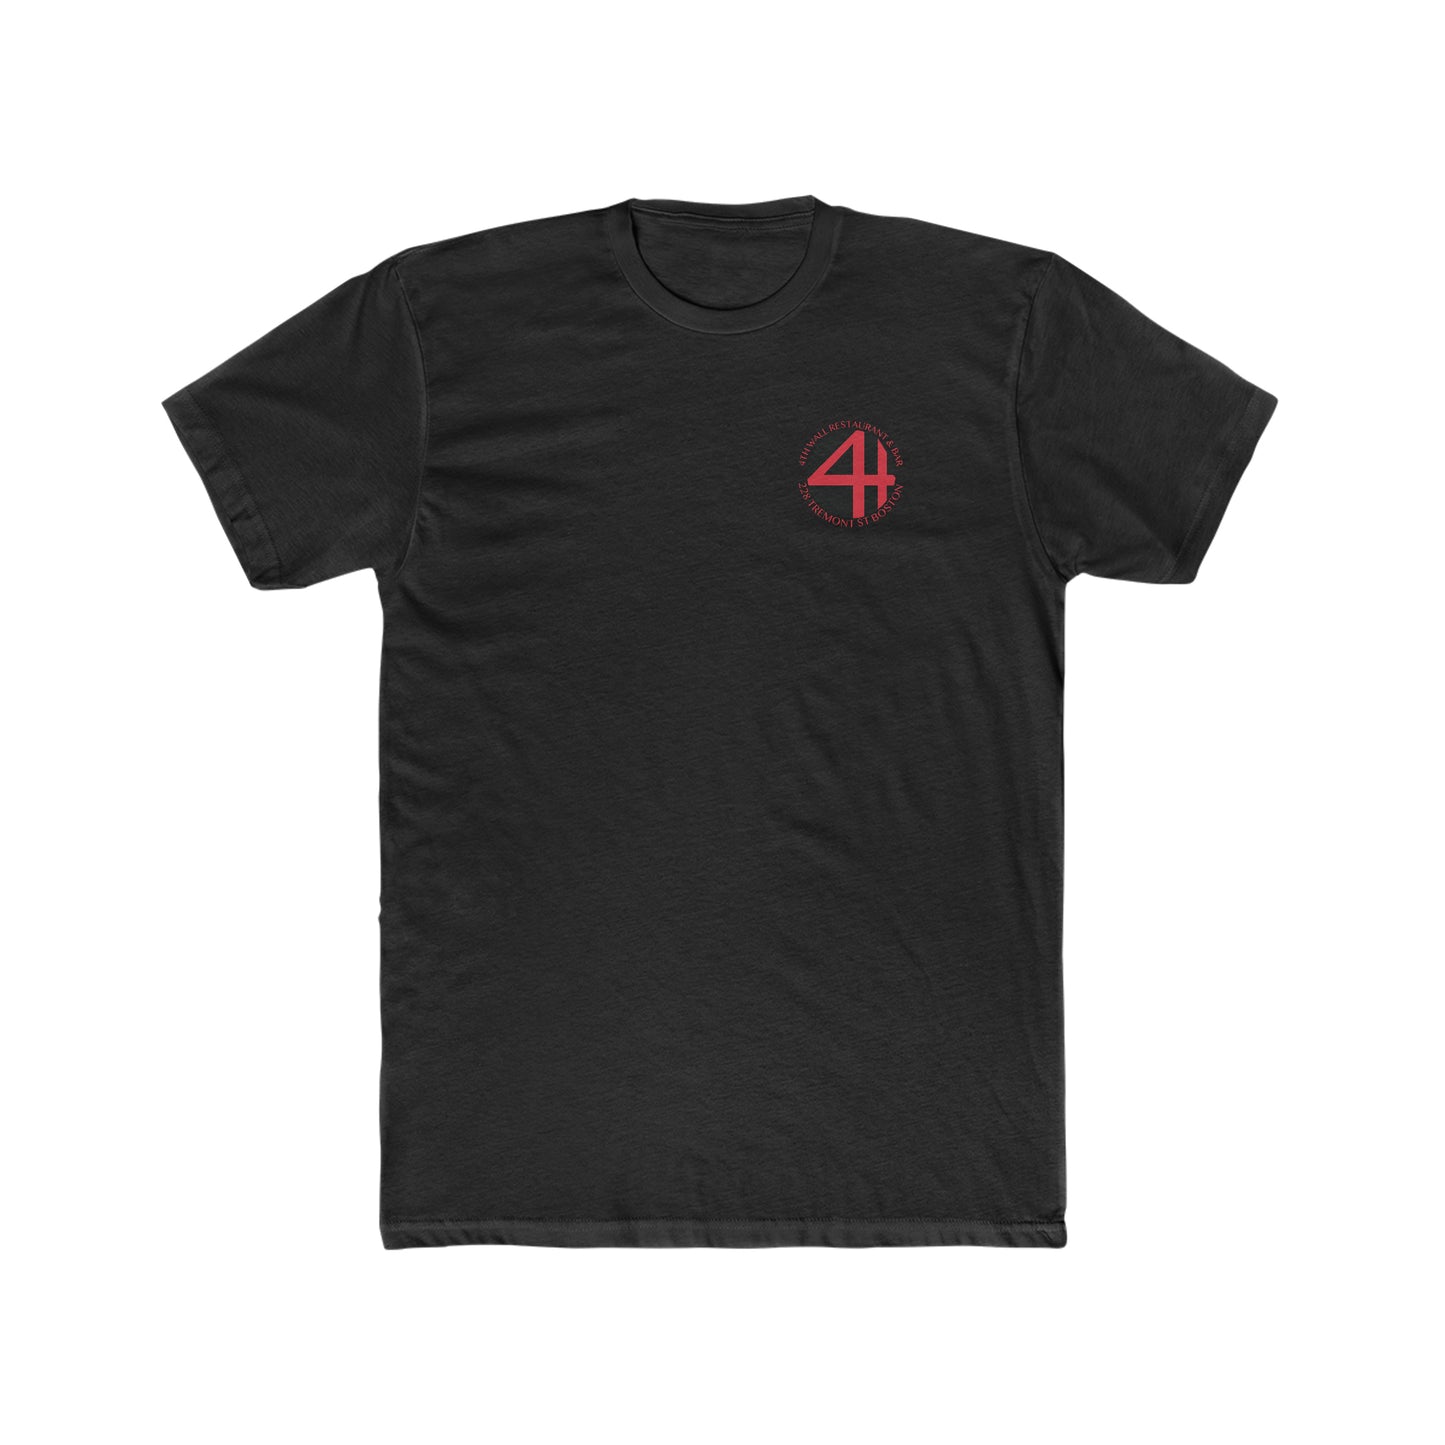 4th Wall The Wall Cotton Tee